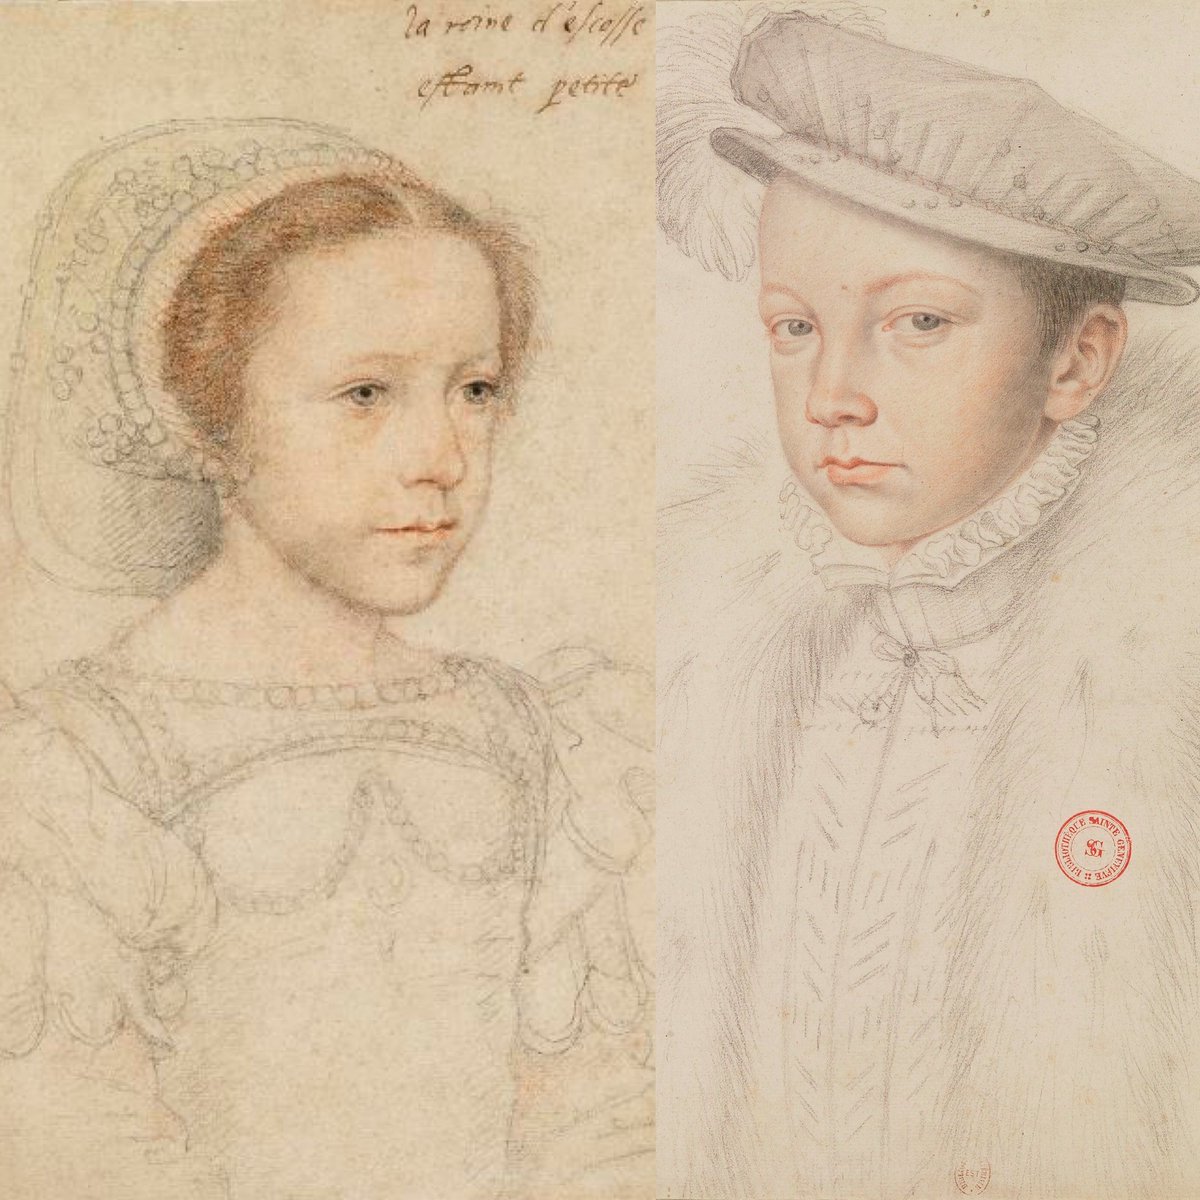 #OTD 24 Apr 1558 #MaryQueenofScots, 15 & François, 14 The French Dauphin were married @notredameparis Mary's white wedding dress surprised all, highly unusual white was seen as the colour of mourning in France The couple had just 2 years together before François' untimely death